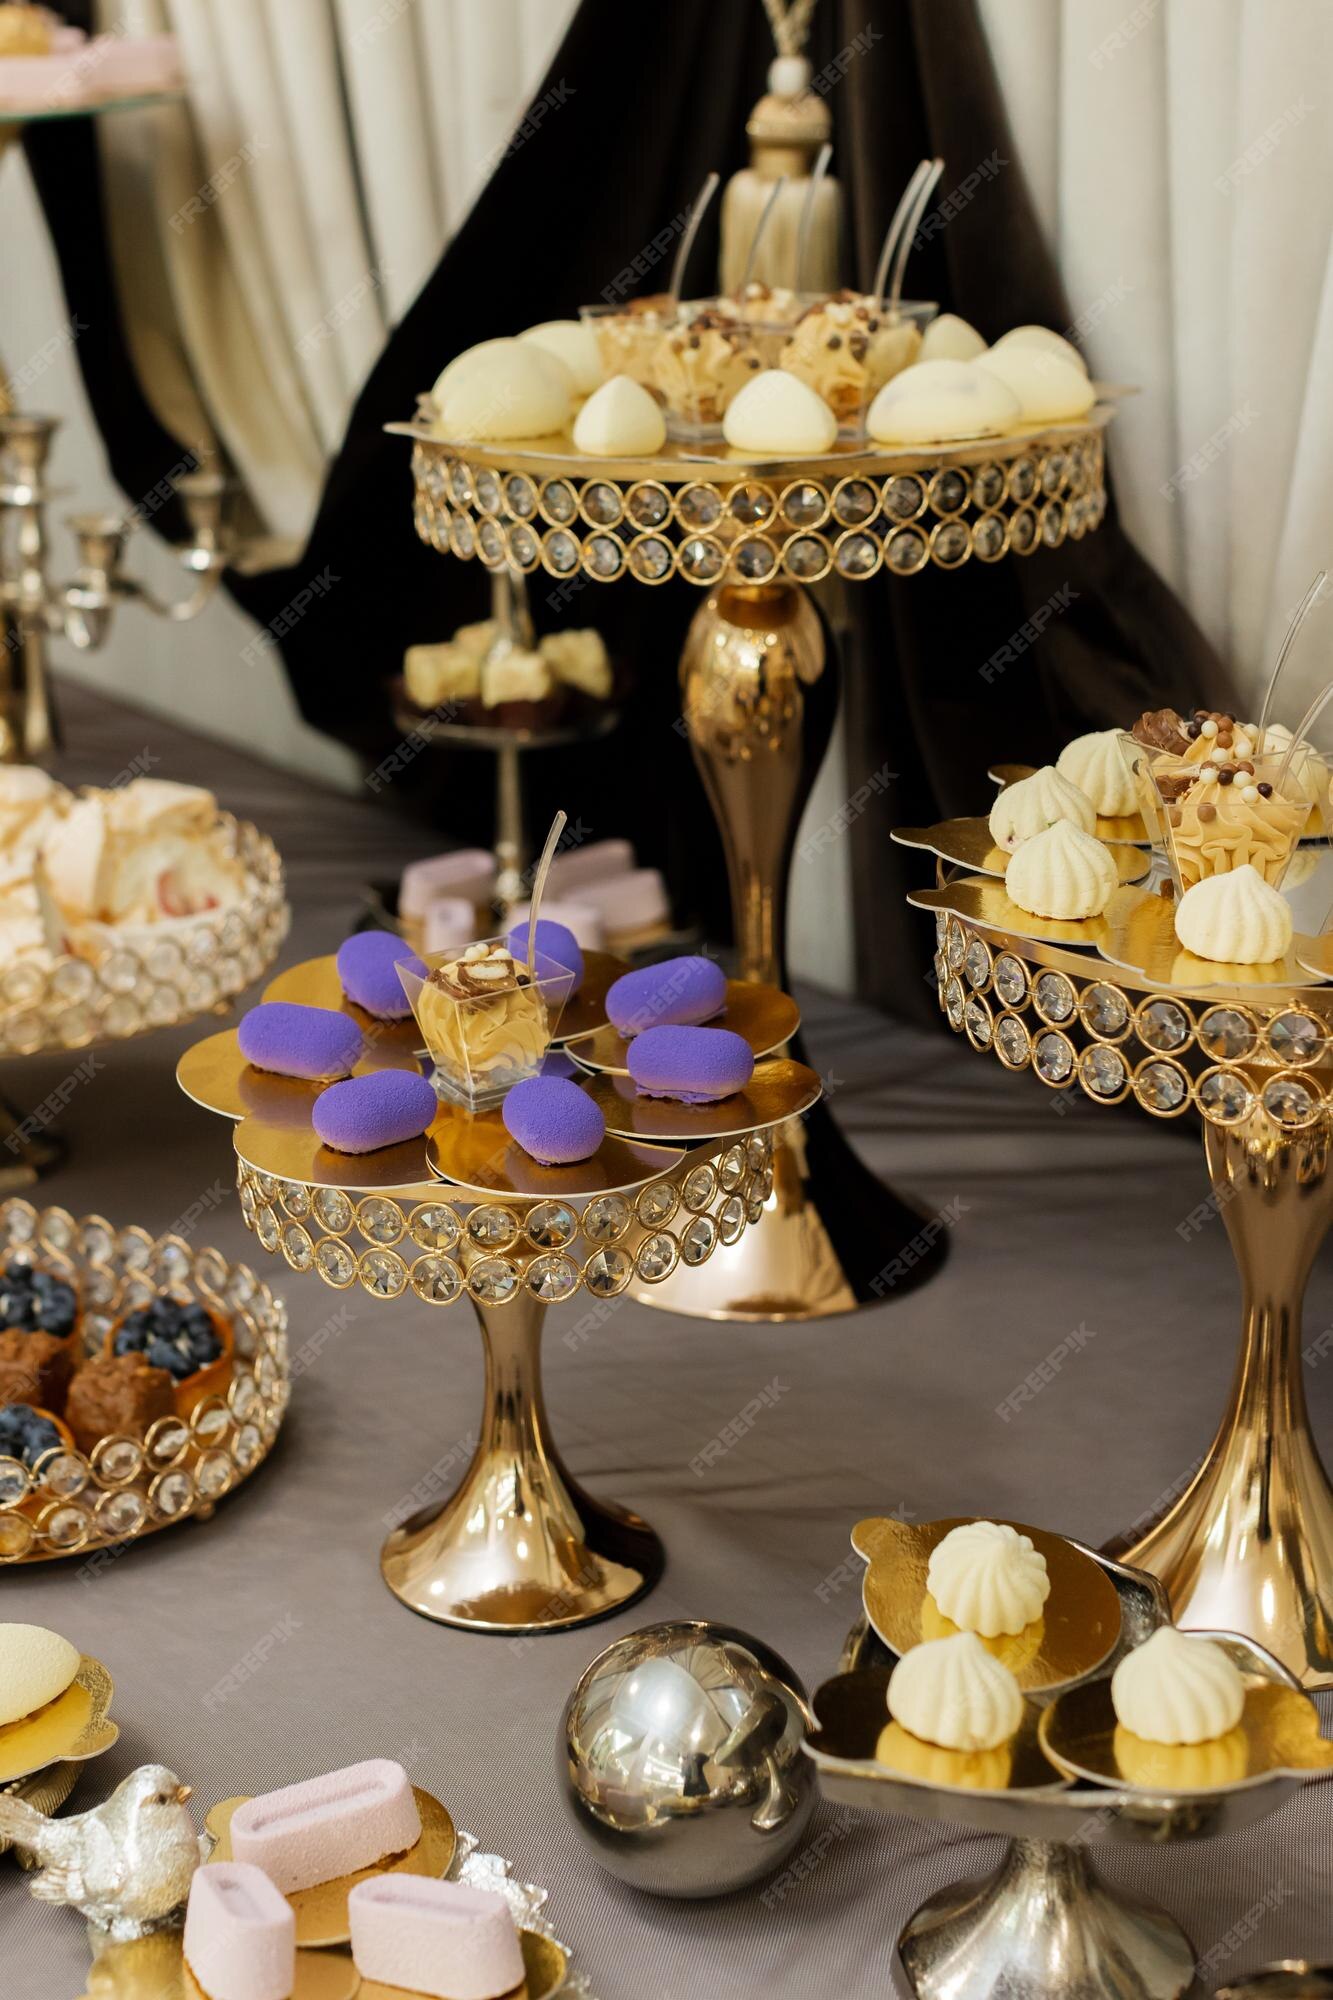 Premium Photo | Table with cakes sweets candy buffet dessert table for a  party goodies for the wedding banquet area close up candy bar decorated  delicious